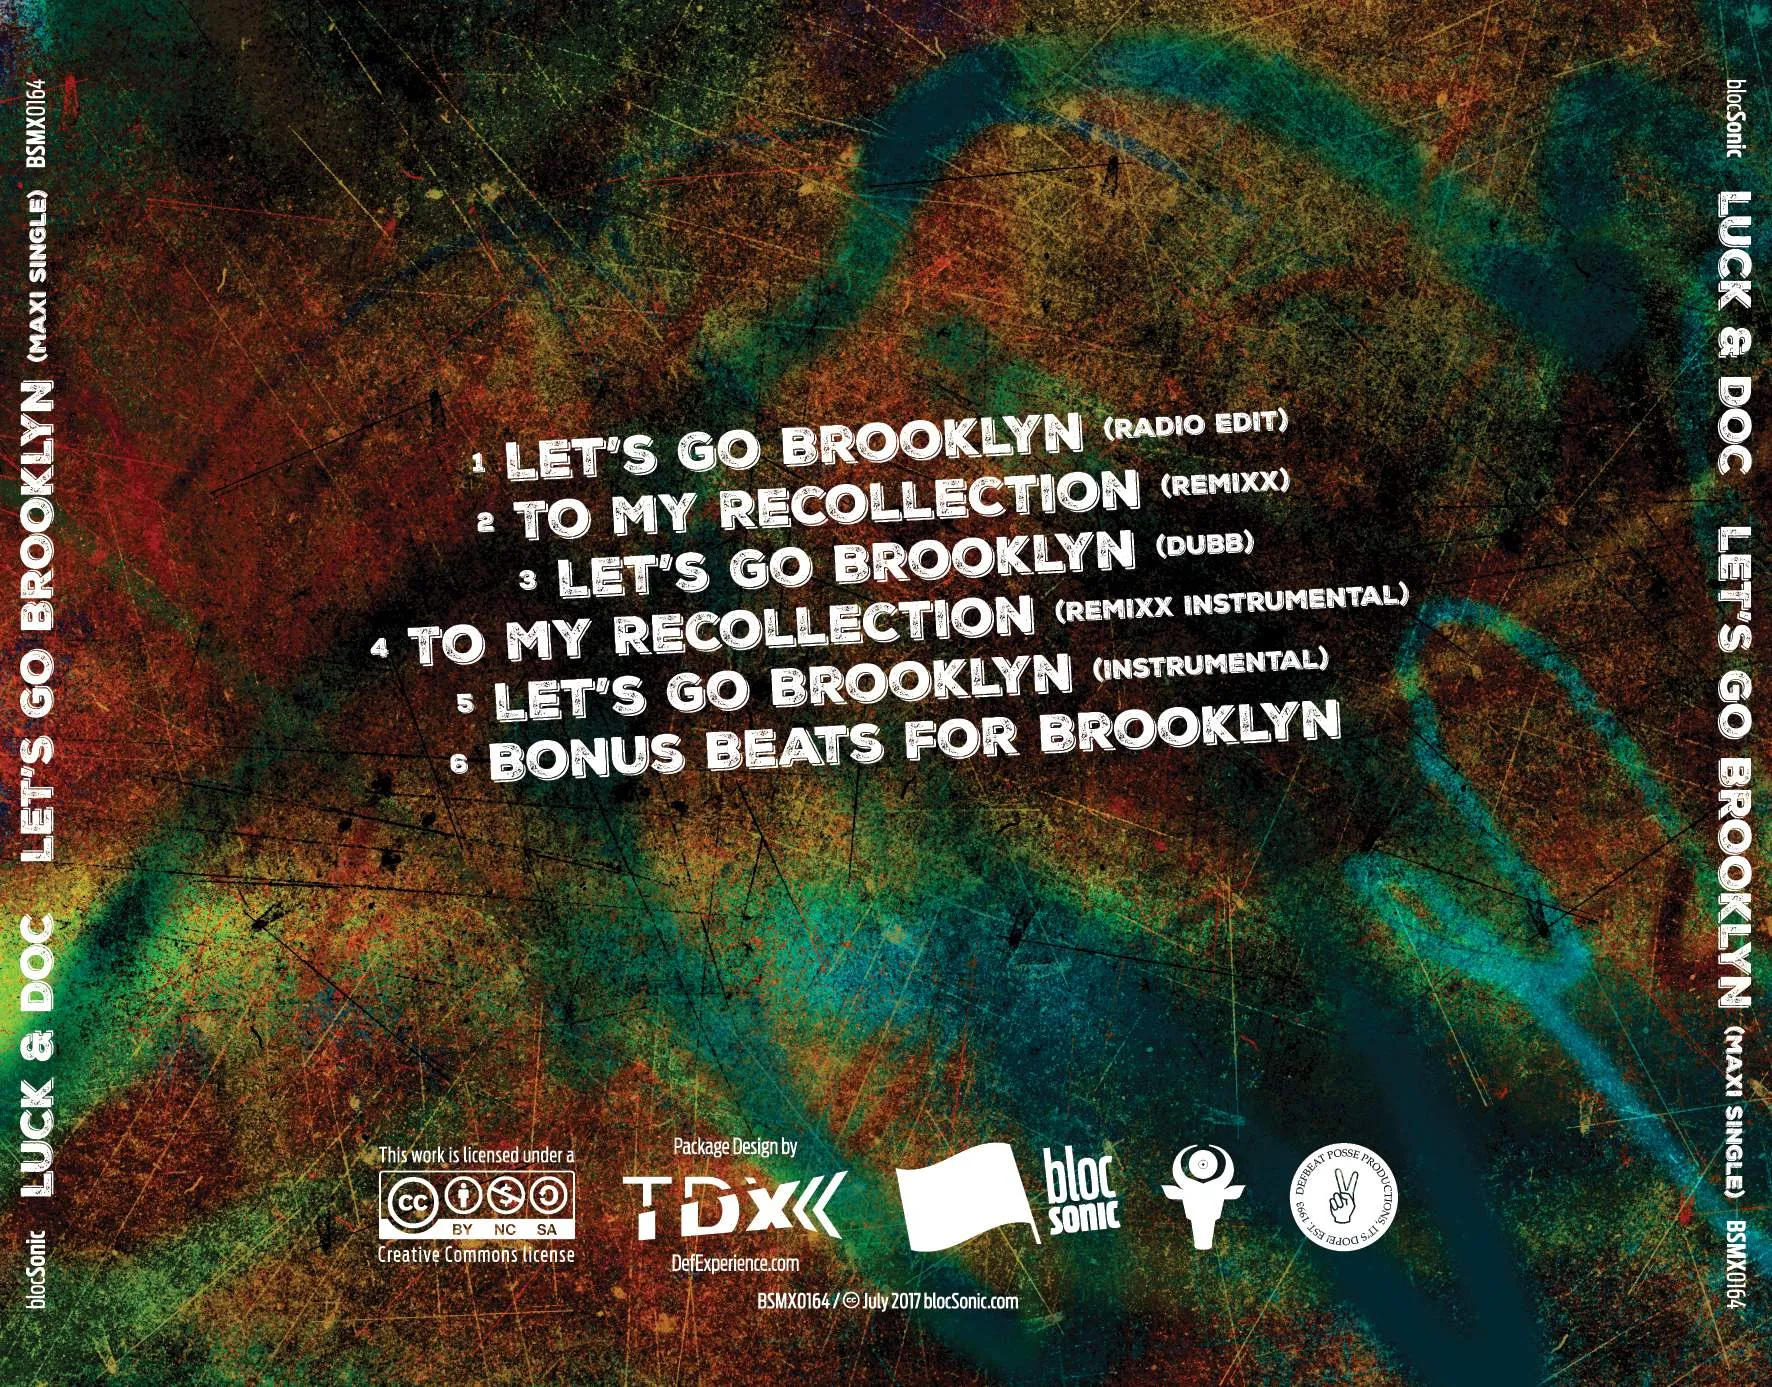 Album traycard for “Let’s Go Brooklyn (Maxi Single)” by Luck &amp; Doc